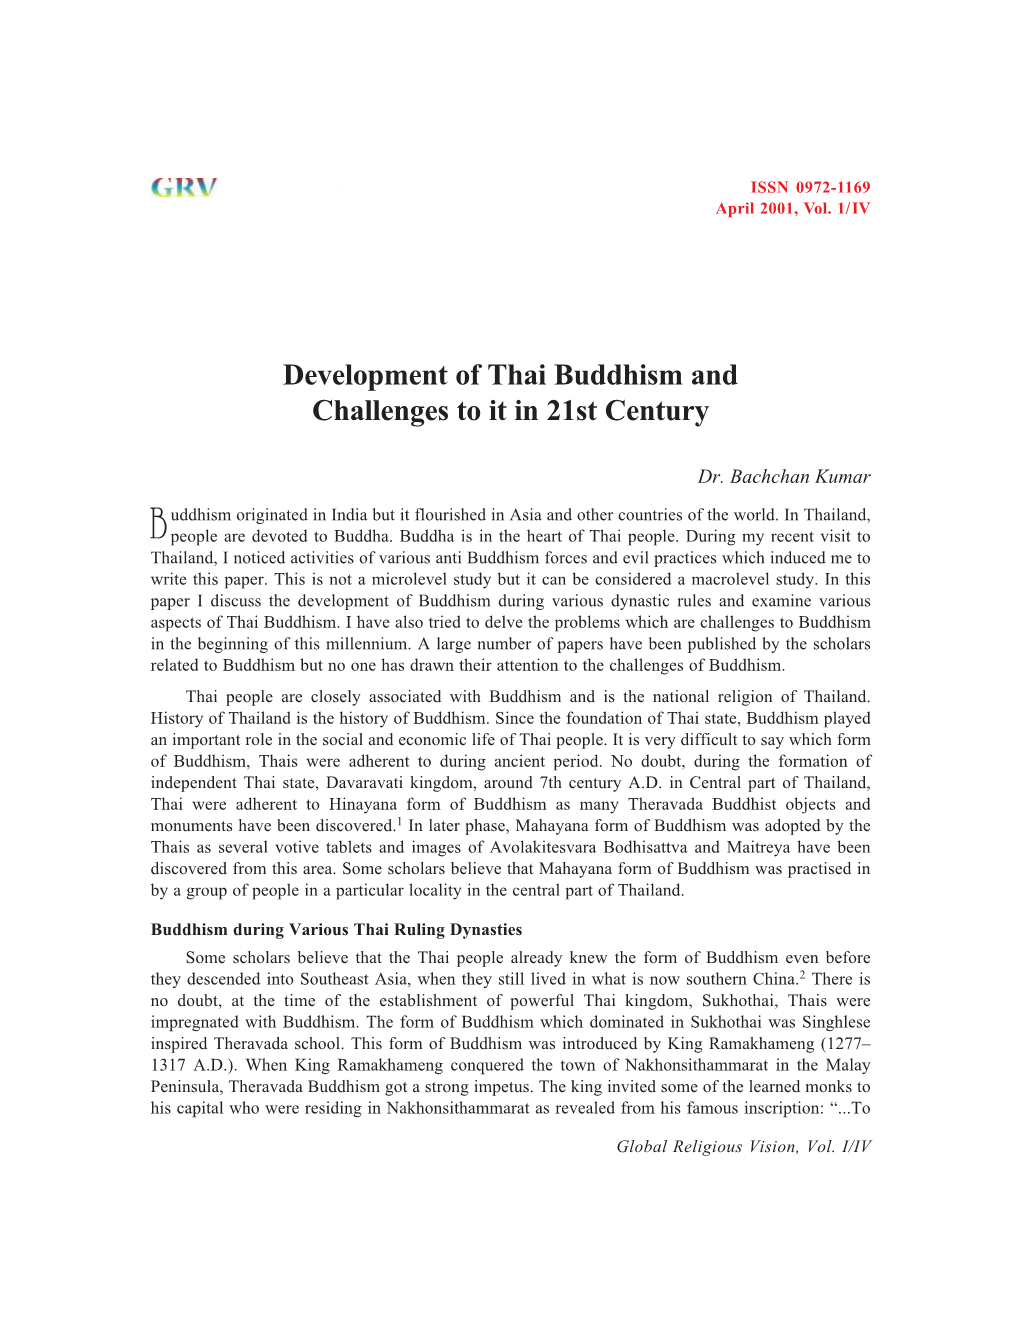 Development of Thai Buddhism and Challenges to It in 21St Century